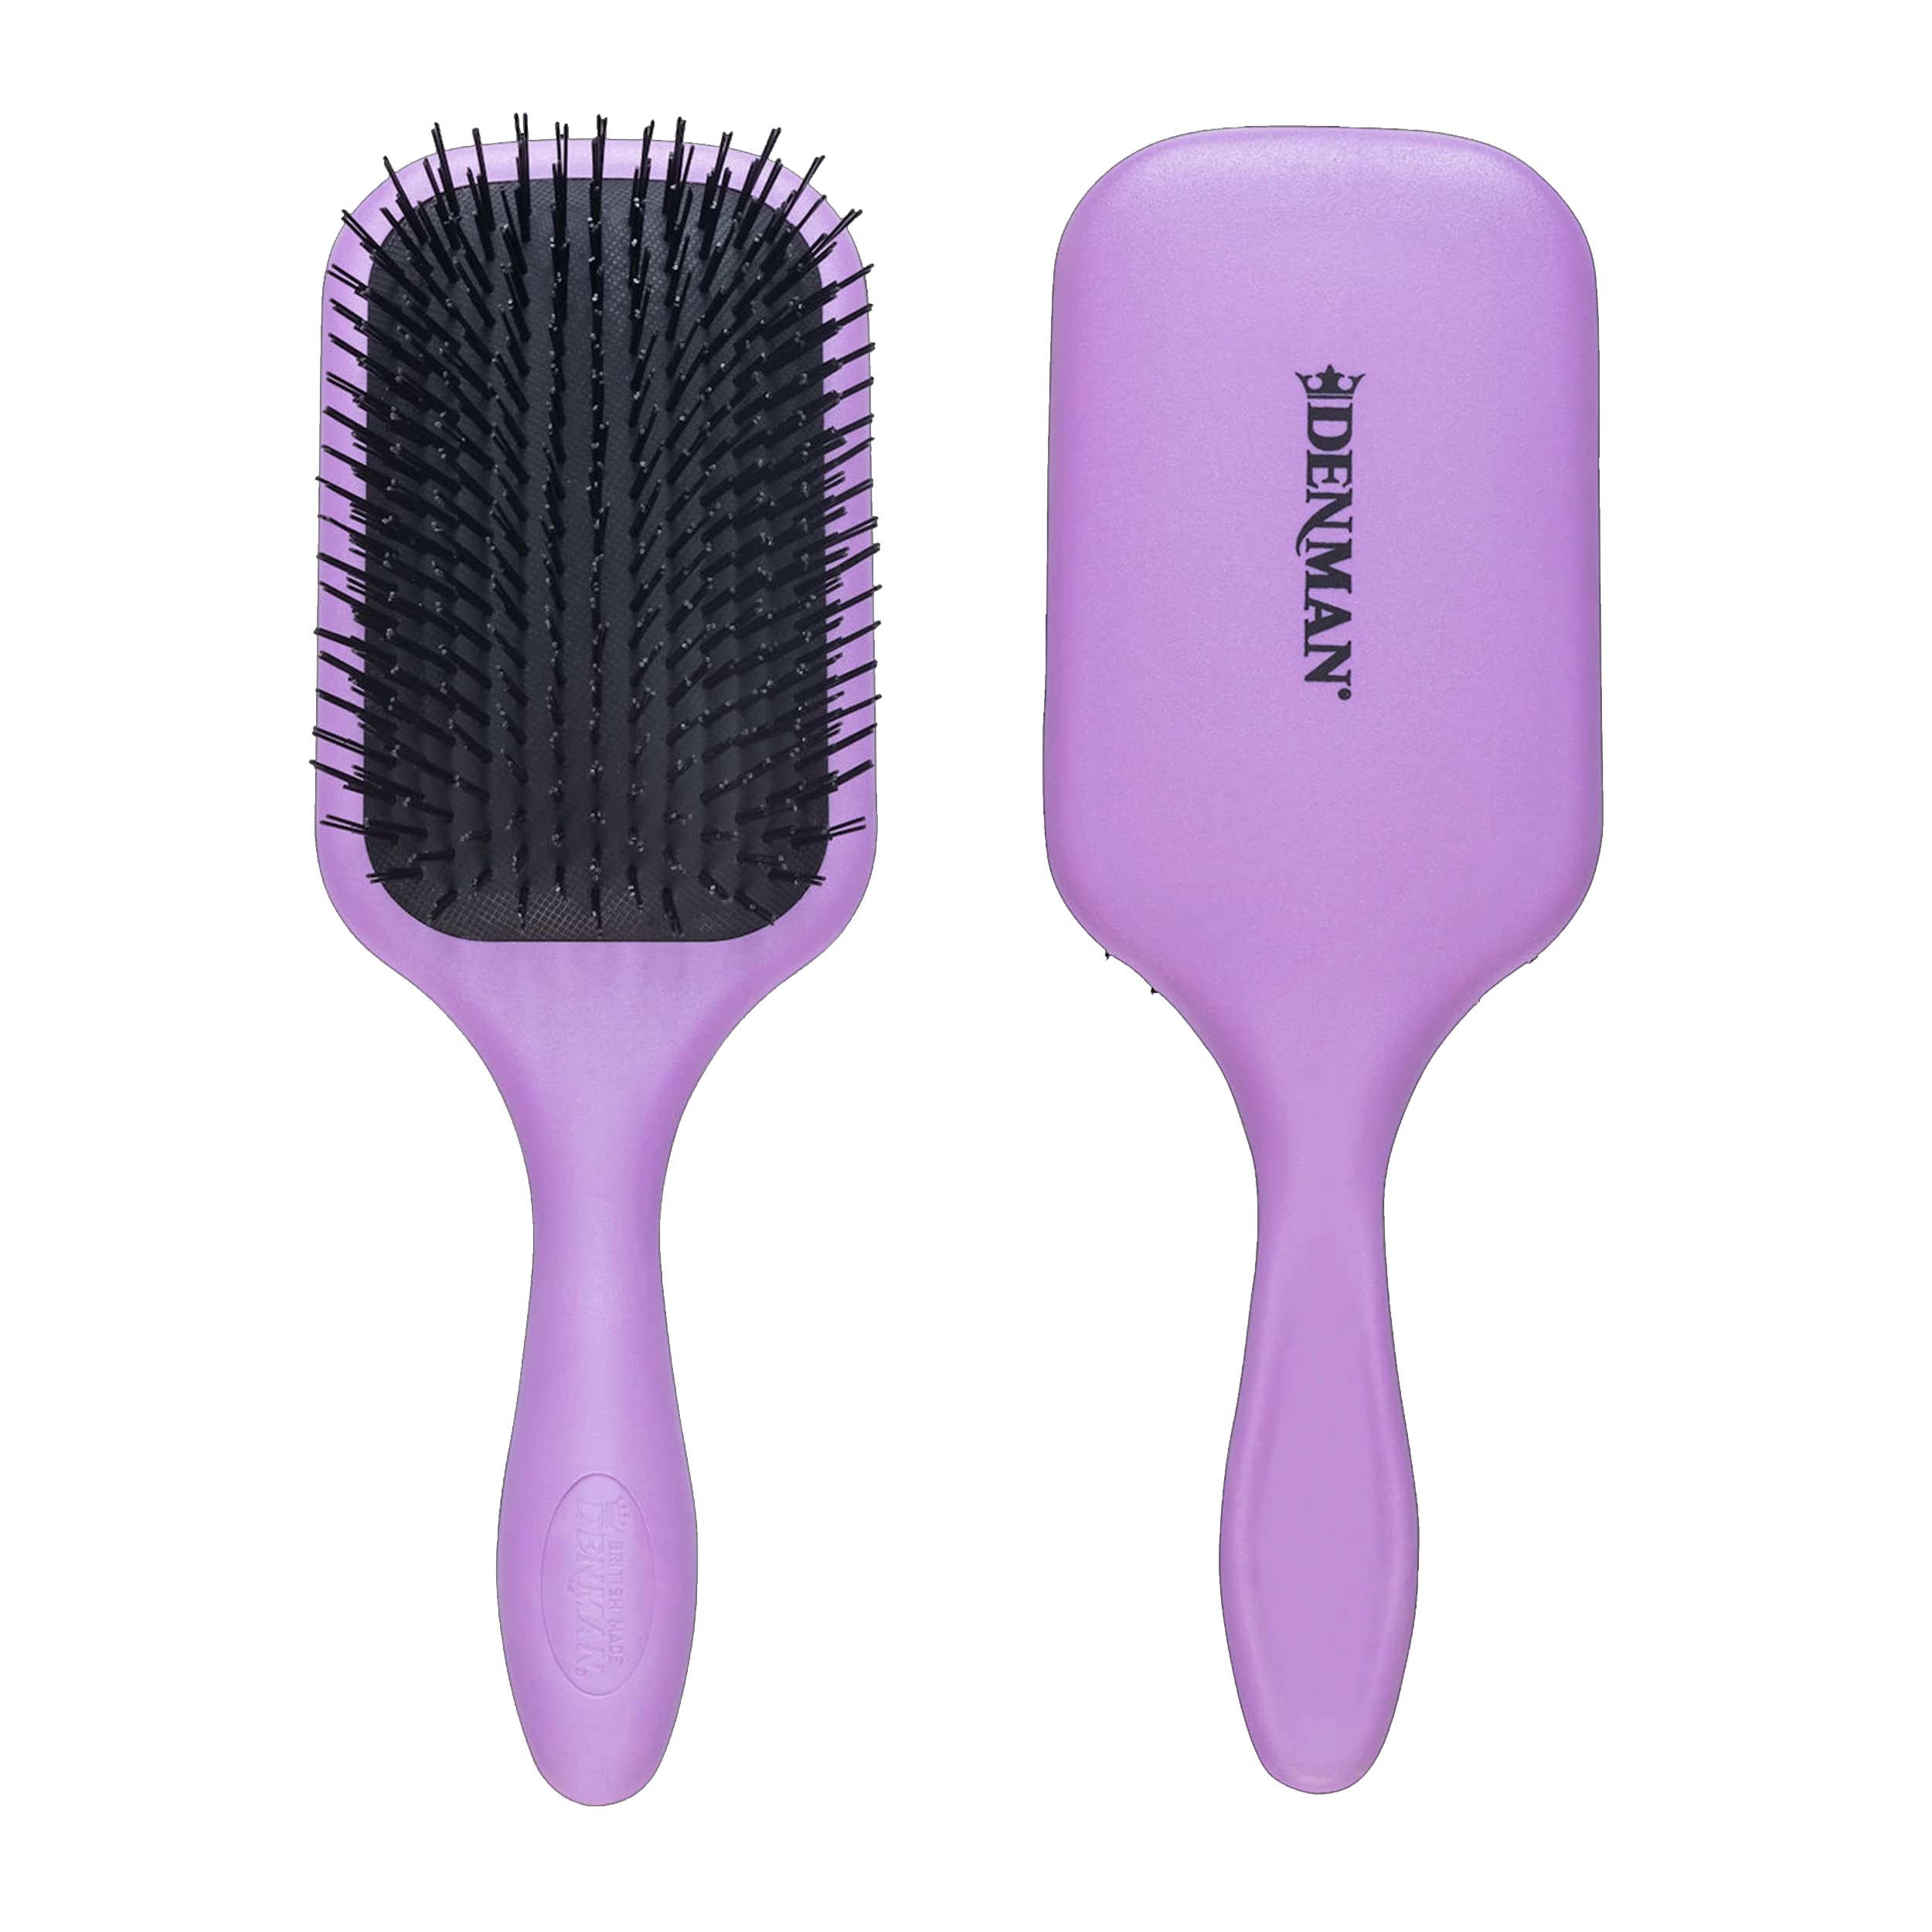 Denman Tangle Tamer Ultra (Violet) Detangling Paddle Brush For Curly Hair And Black Natural Hair - use with both Wet & Dry Hair, D90L